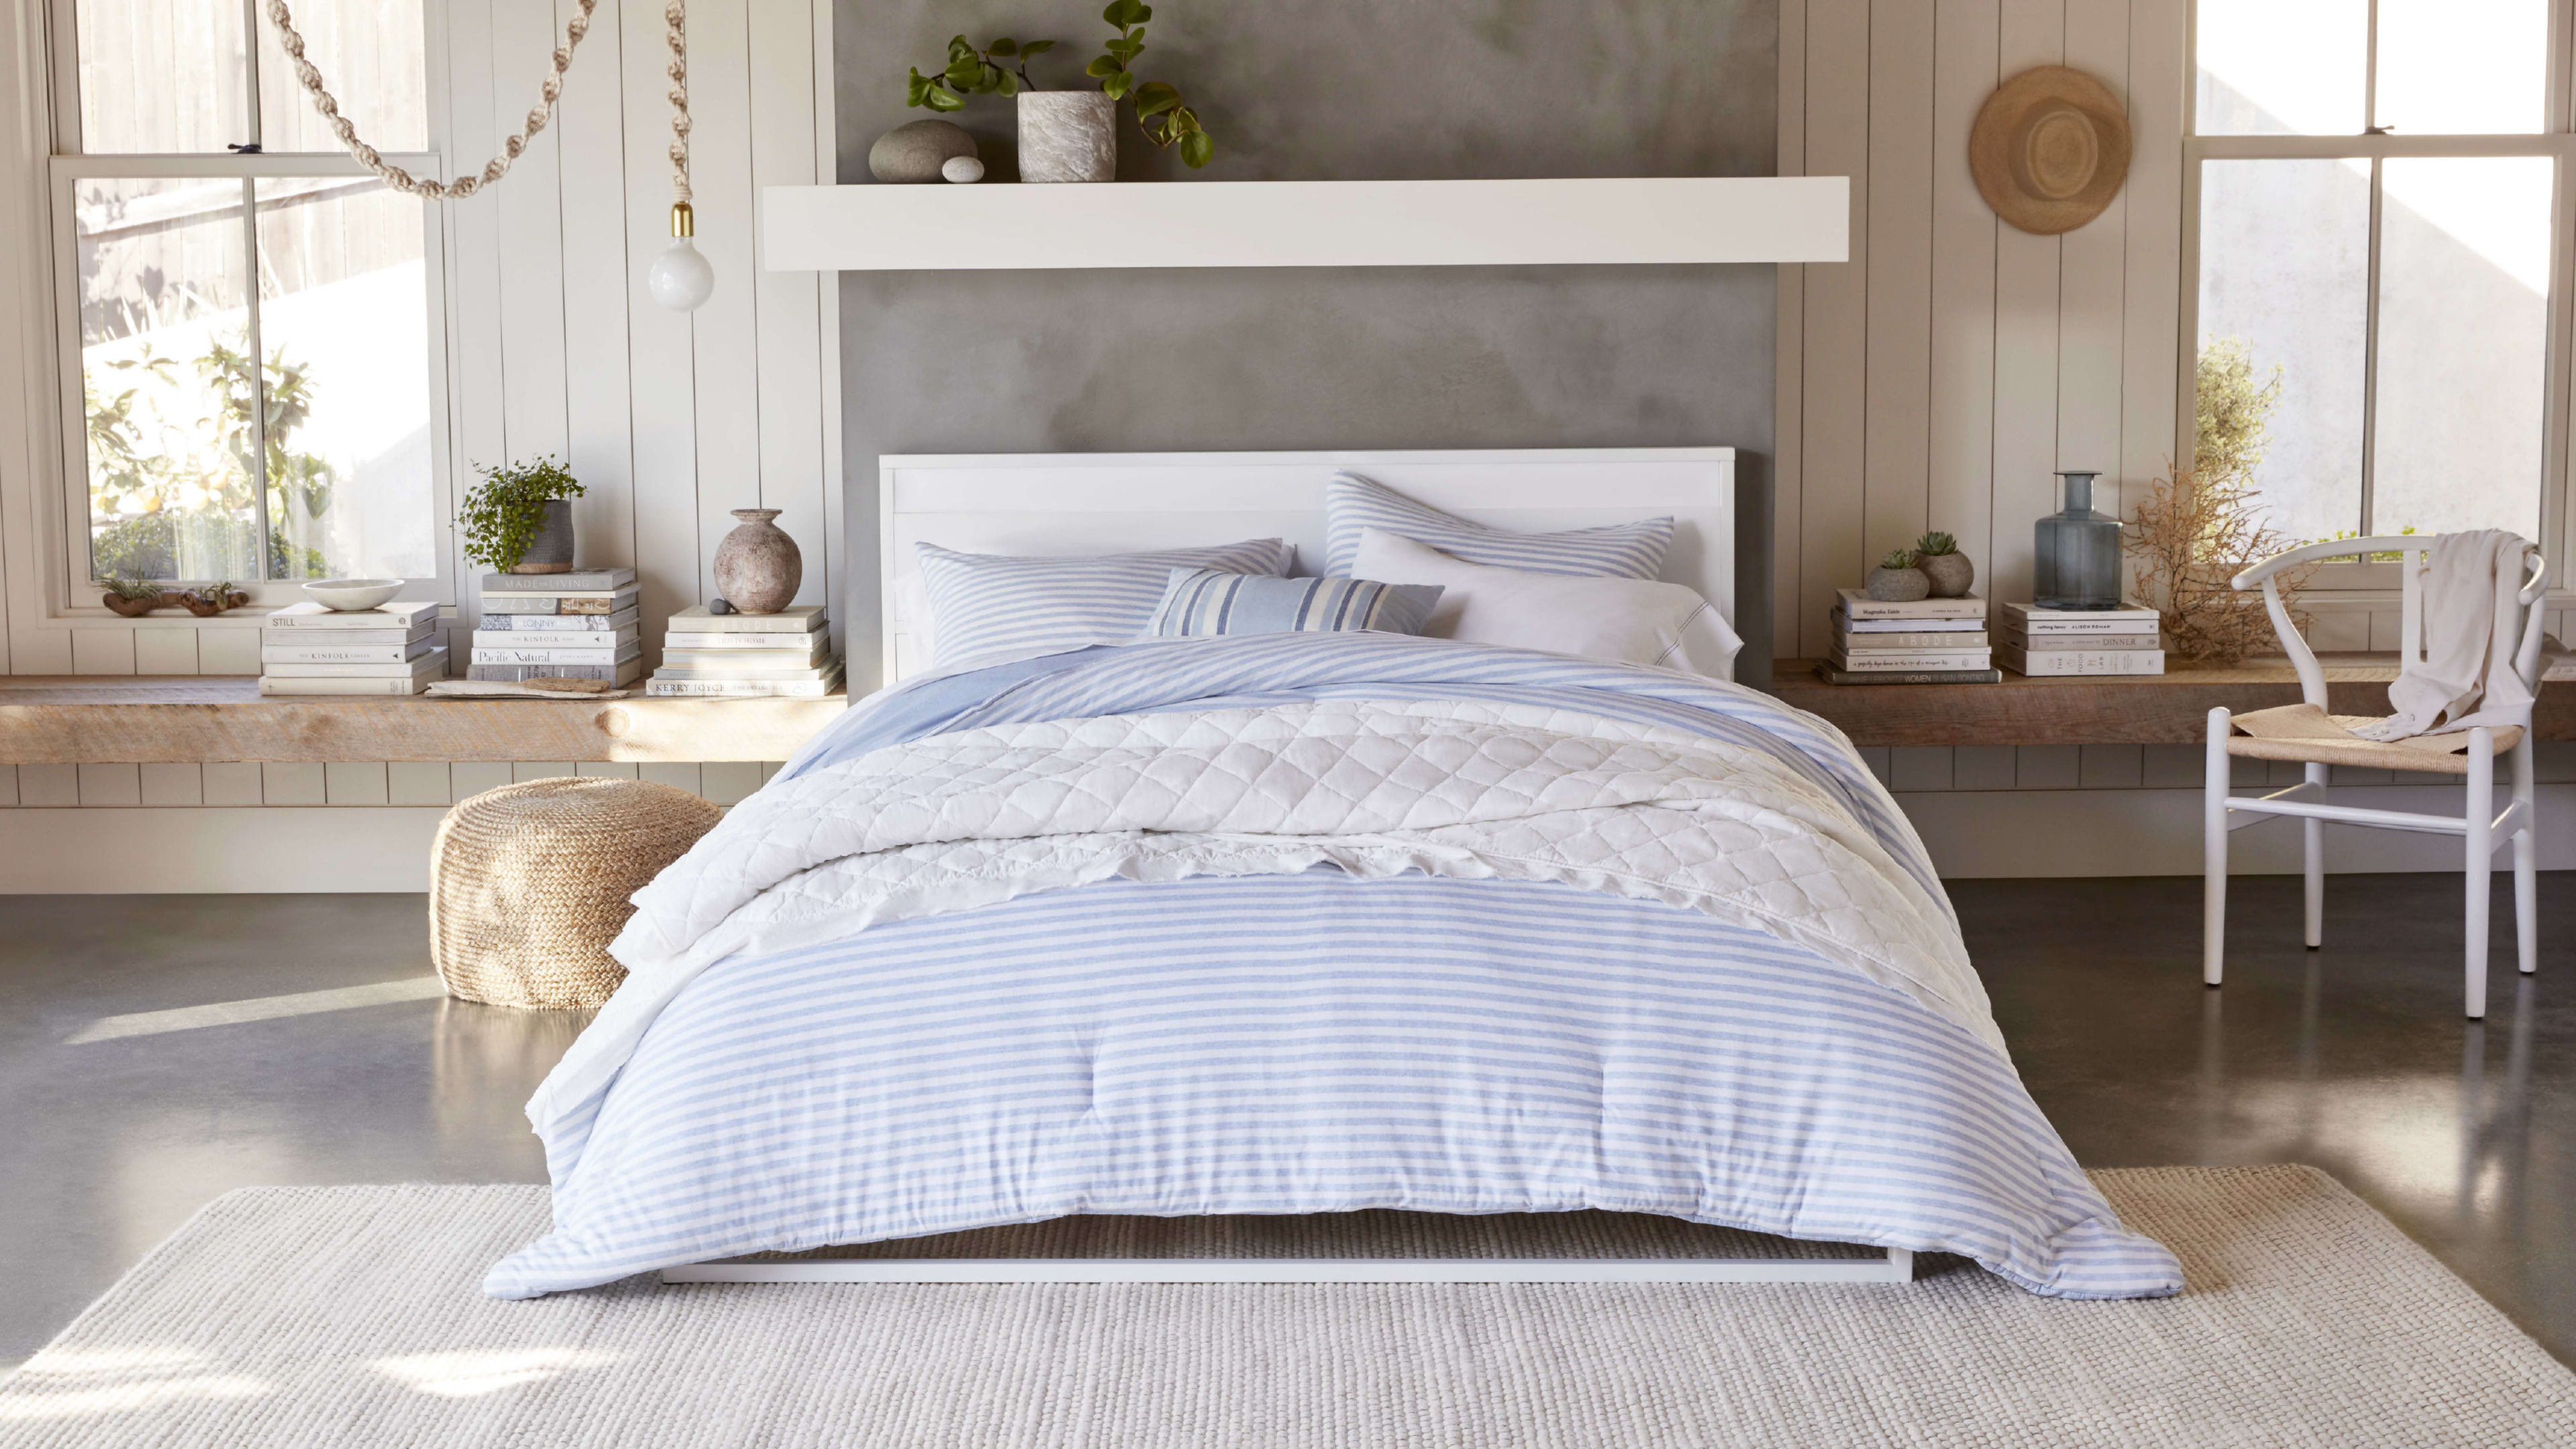 Gap-branded sheets and pillows are coming soon to Walmart